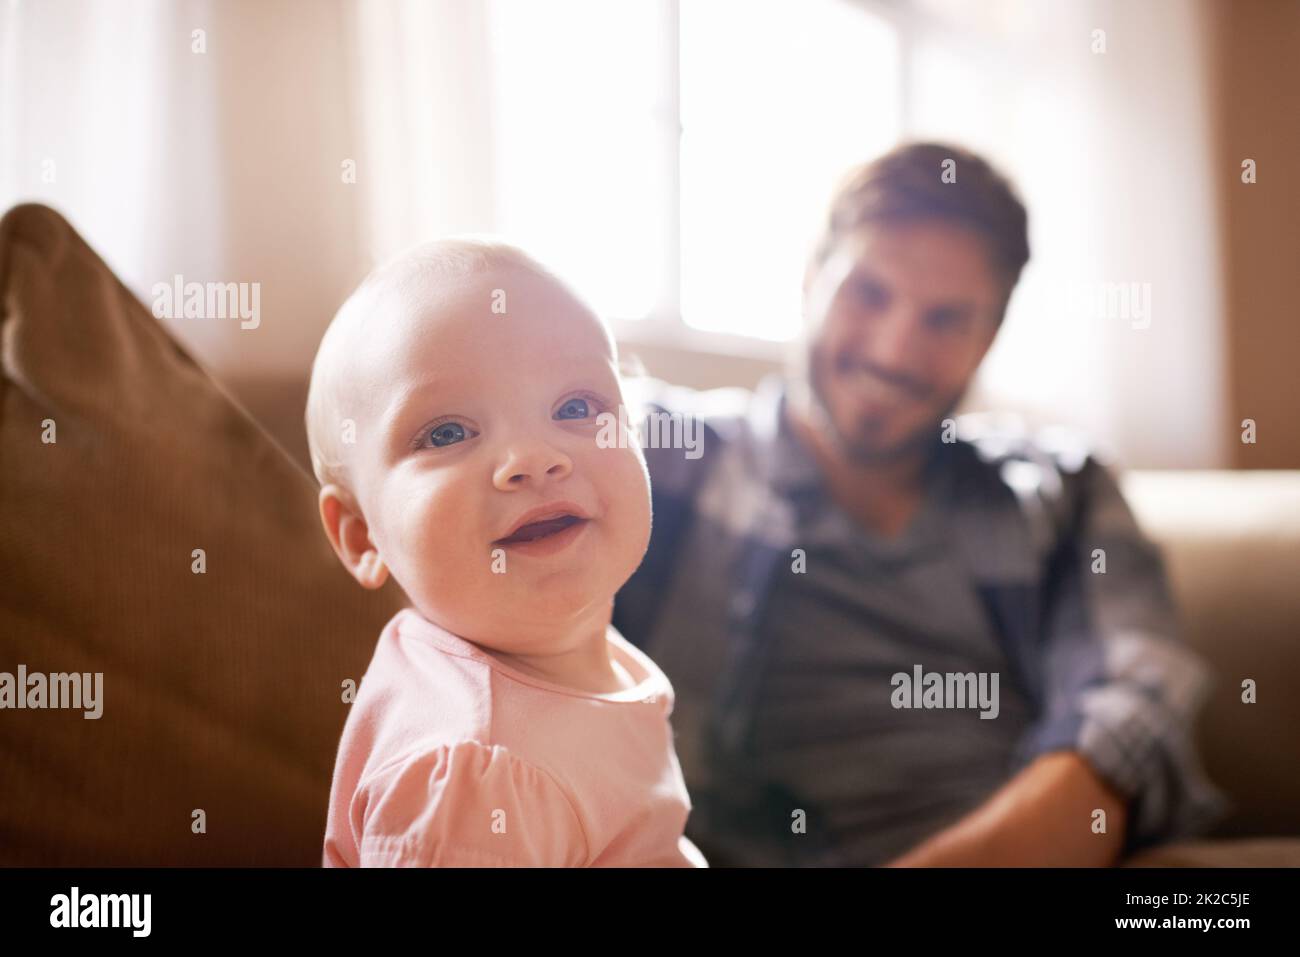 Already too cute and curious. Shot of an adorable baby girl sitting on the sofa with her father in the background. Stock Photo